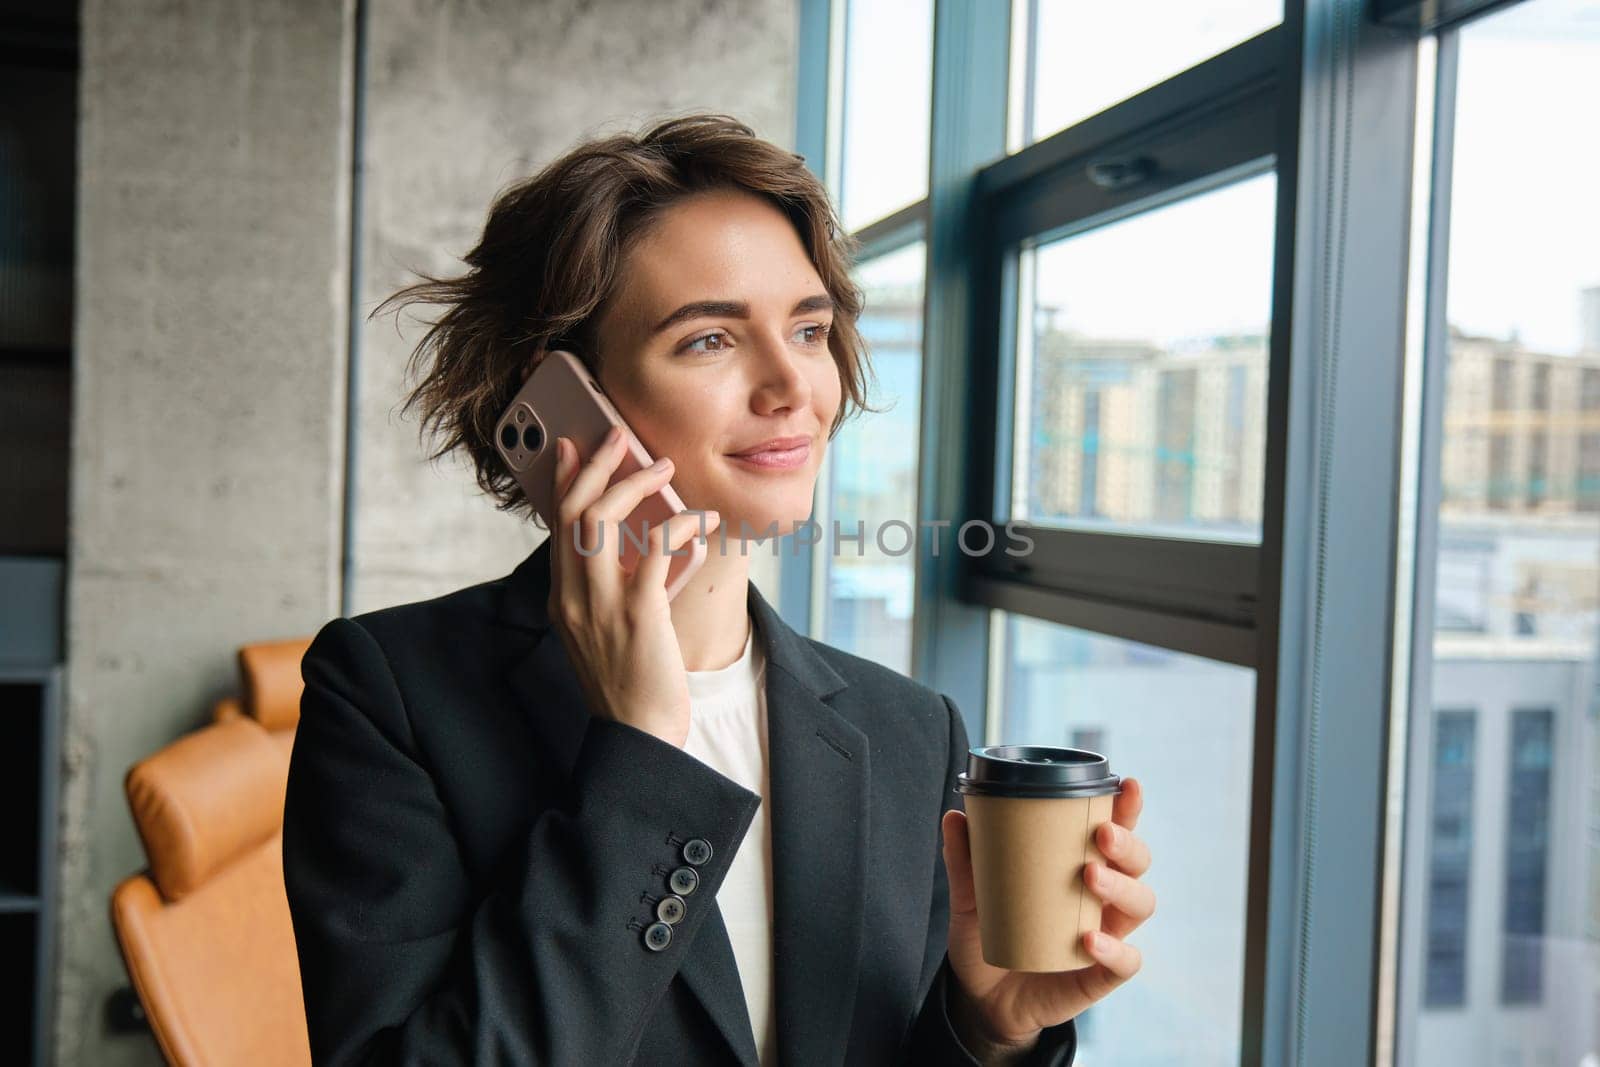 Image of female entrepreneur answering a phone call, standing in office and looking outside window, drinking coffee and having a conversation, wearing business suit.